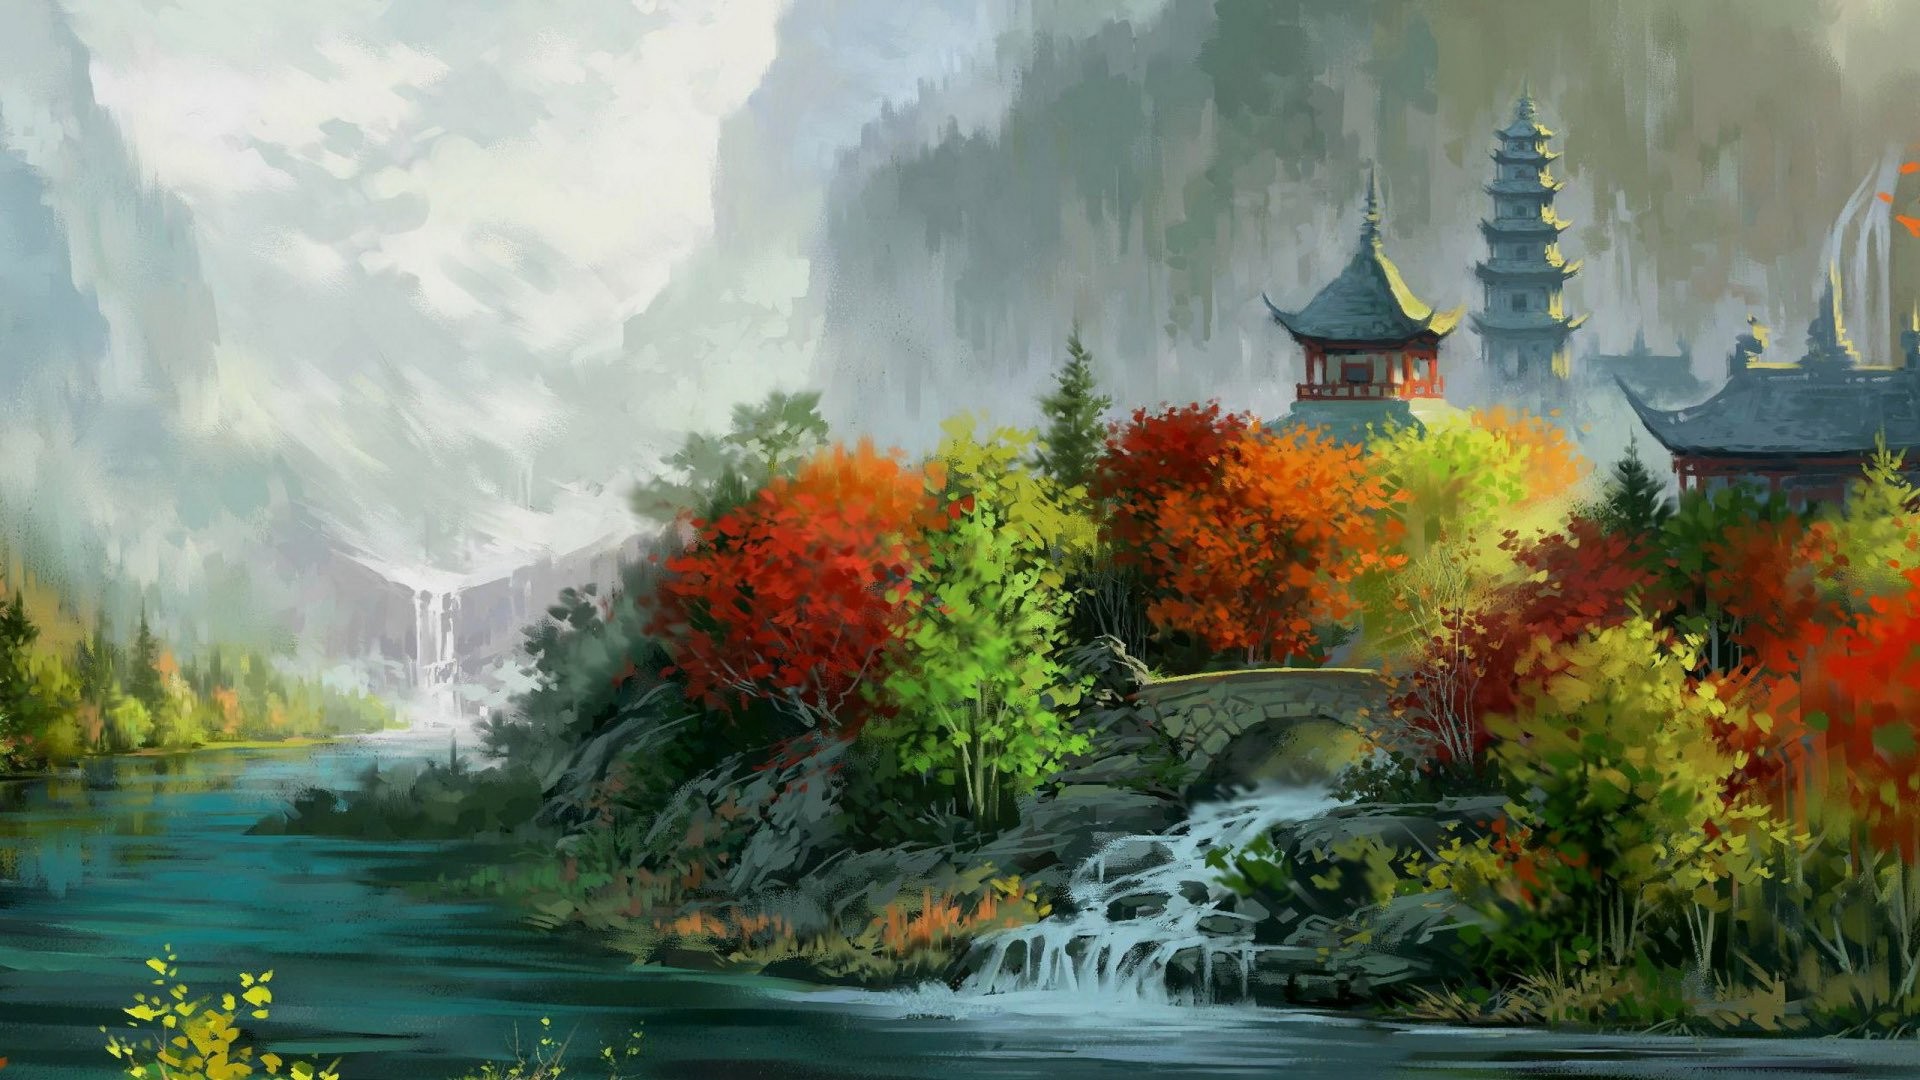 General 1920x1080 artwork painting digital art Asian architecture house tower nature landscape river bridge waterfall trees forest valley mountains fall leaves